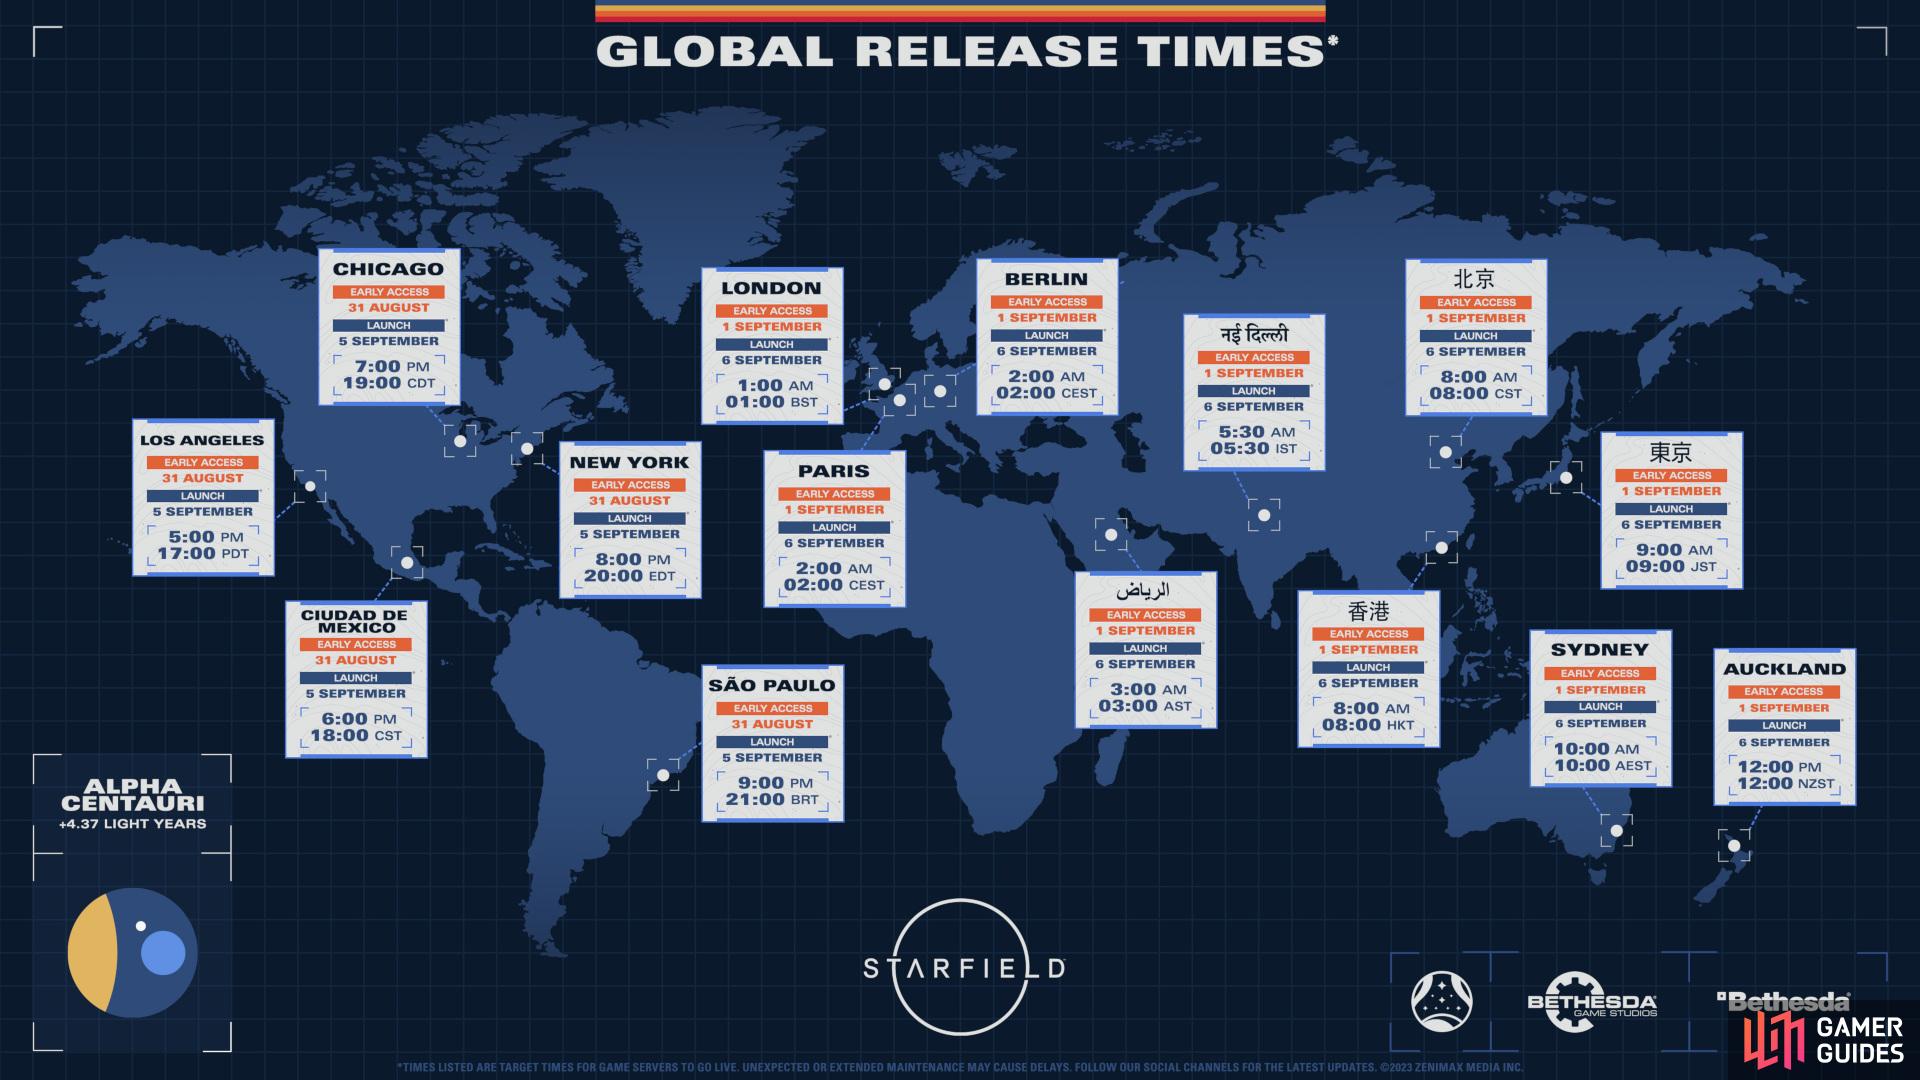 Here is a Starfield Early Access Release Times infographic provided by Bethesda.